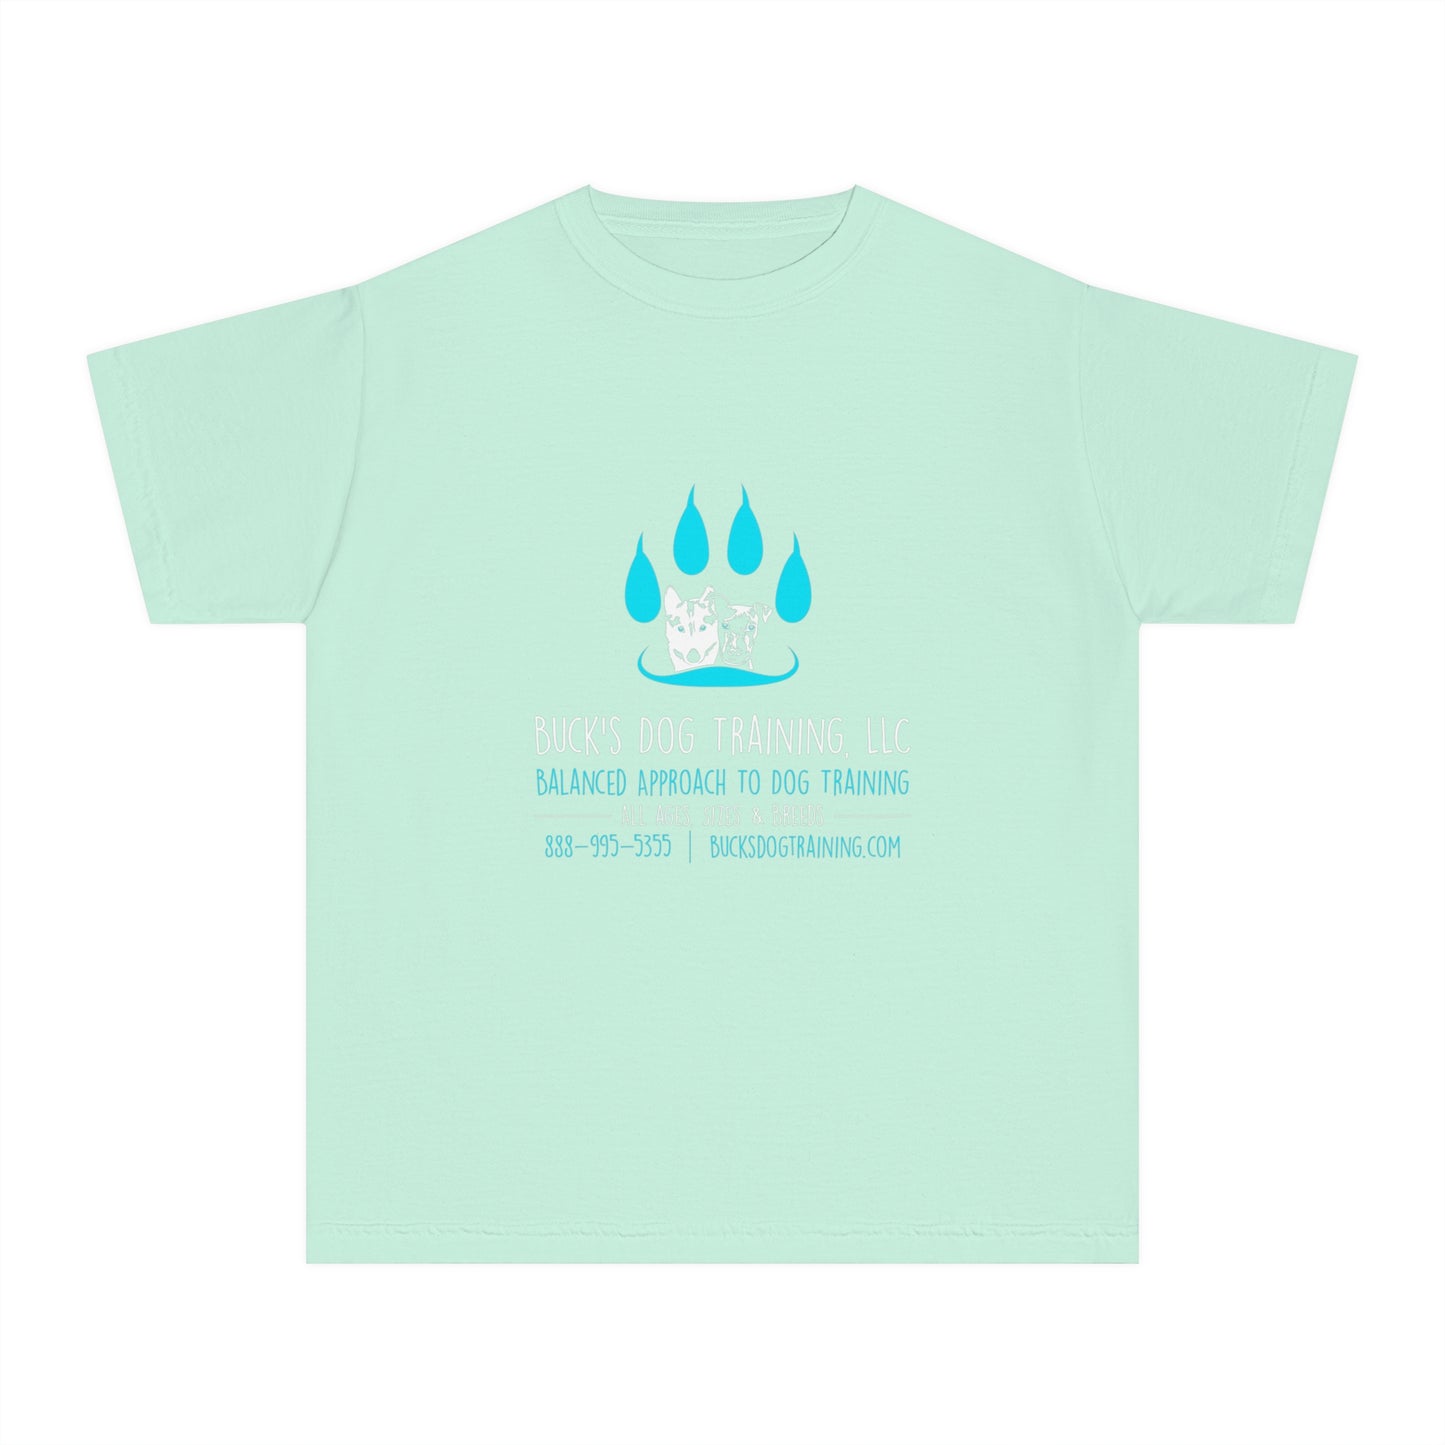 Youth Midweight Tee